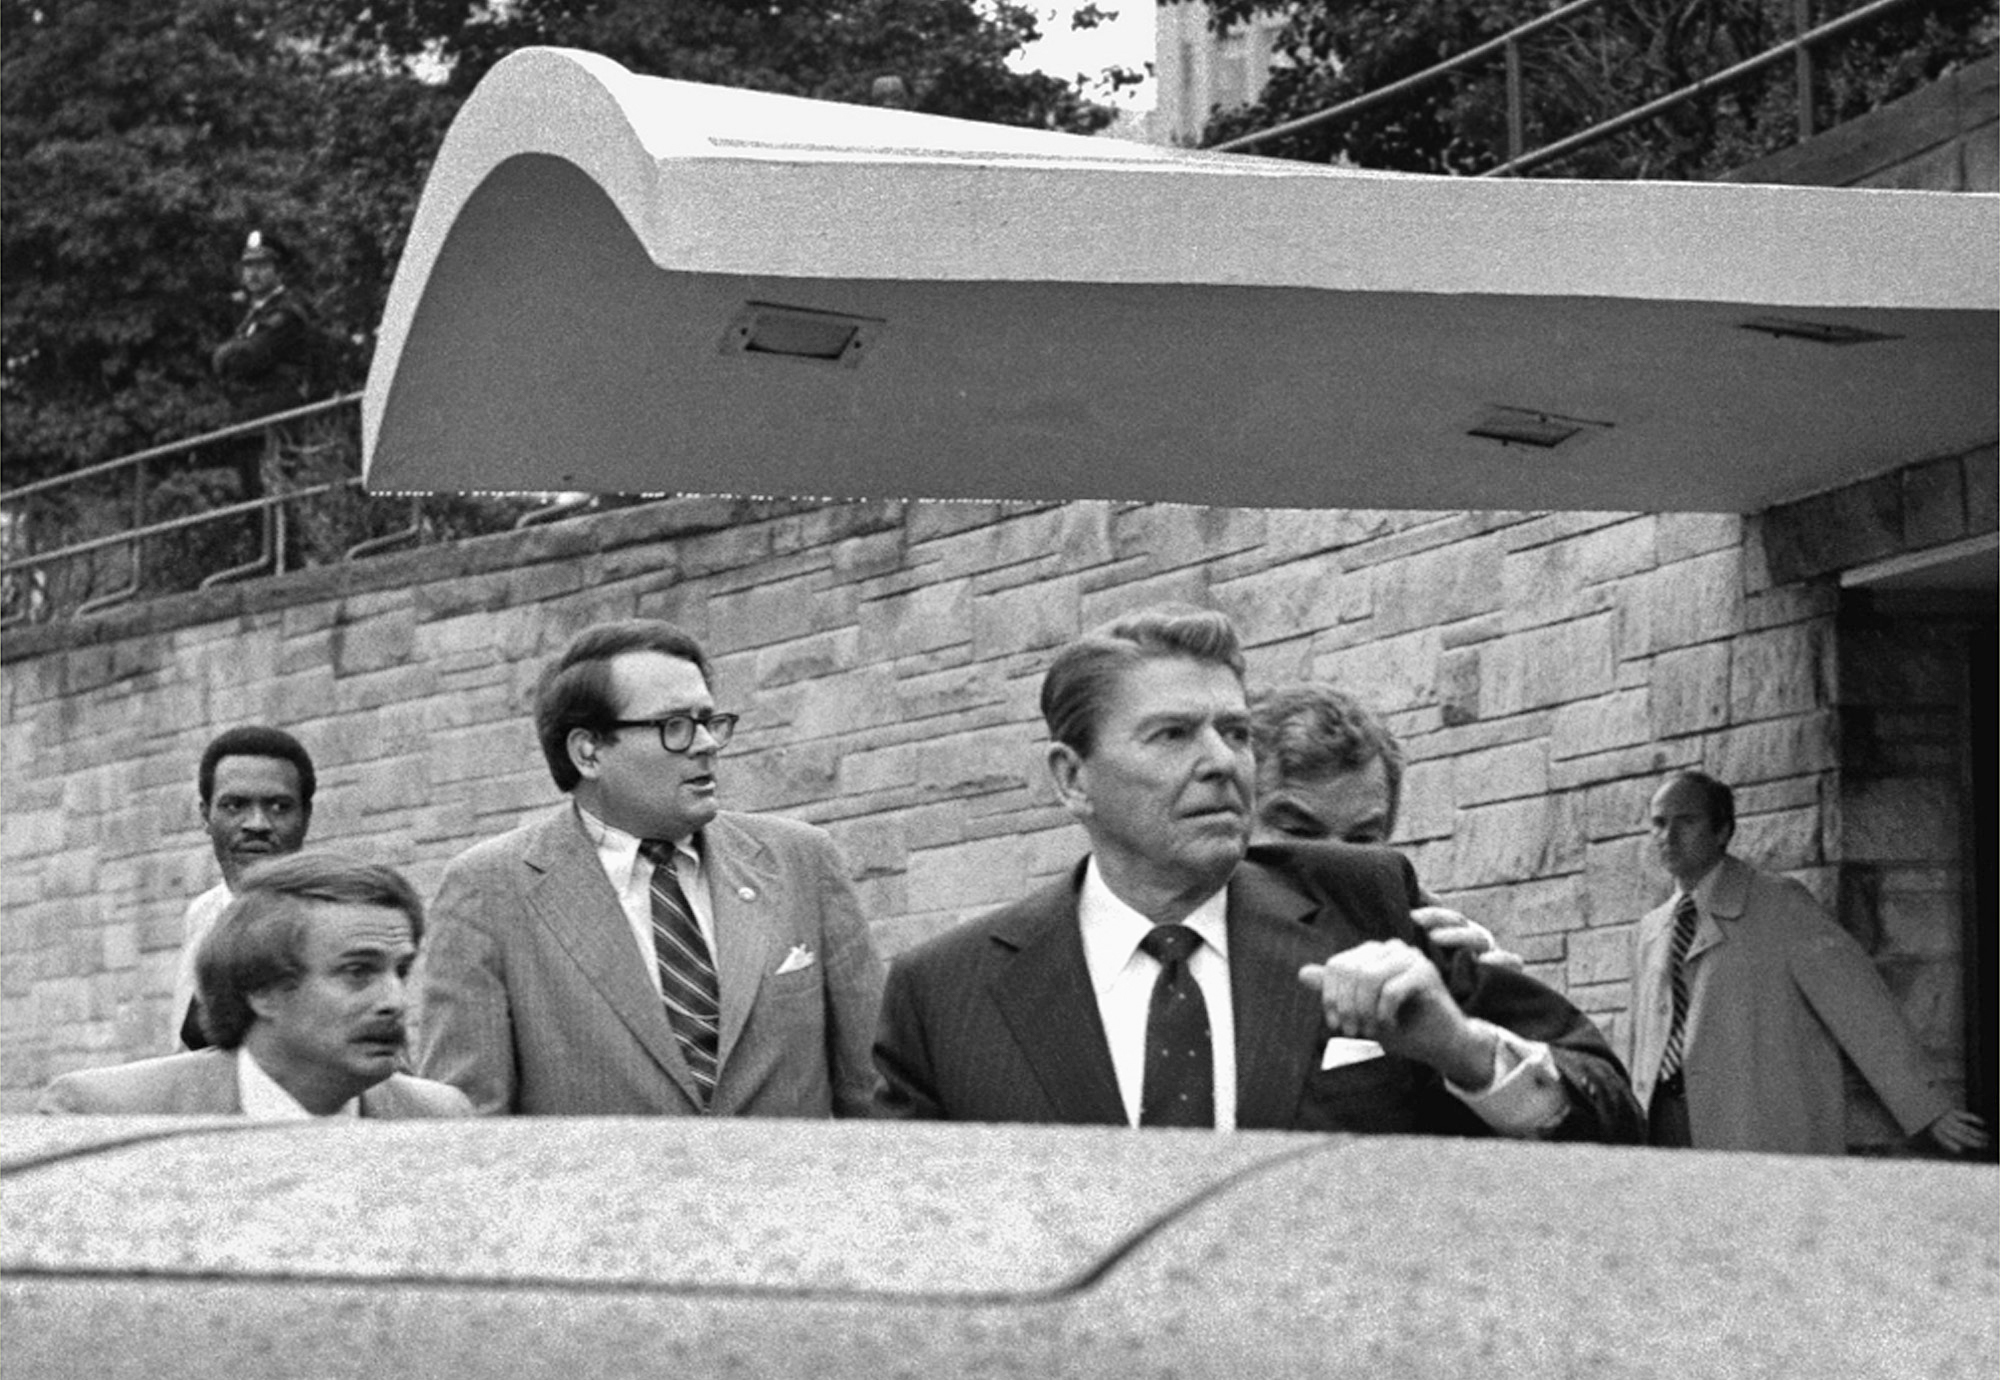 U.S. President Ronald Reagan winces and raises his left arm as he was shot by an assailant as he left a Washington hotel, Monday, March 30, 1981, after making a speech to a labor group. The President was shot in the upper left side. (AP Photo/Ron Edmonds)